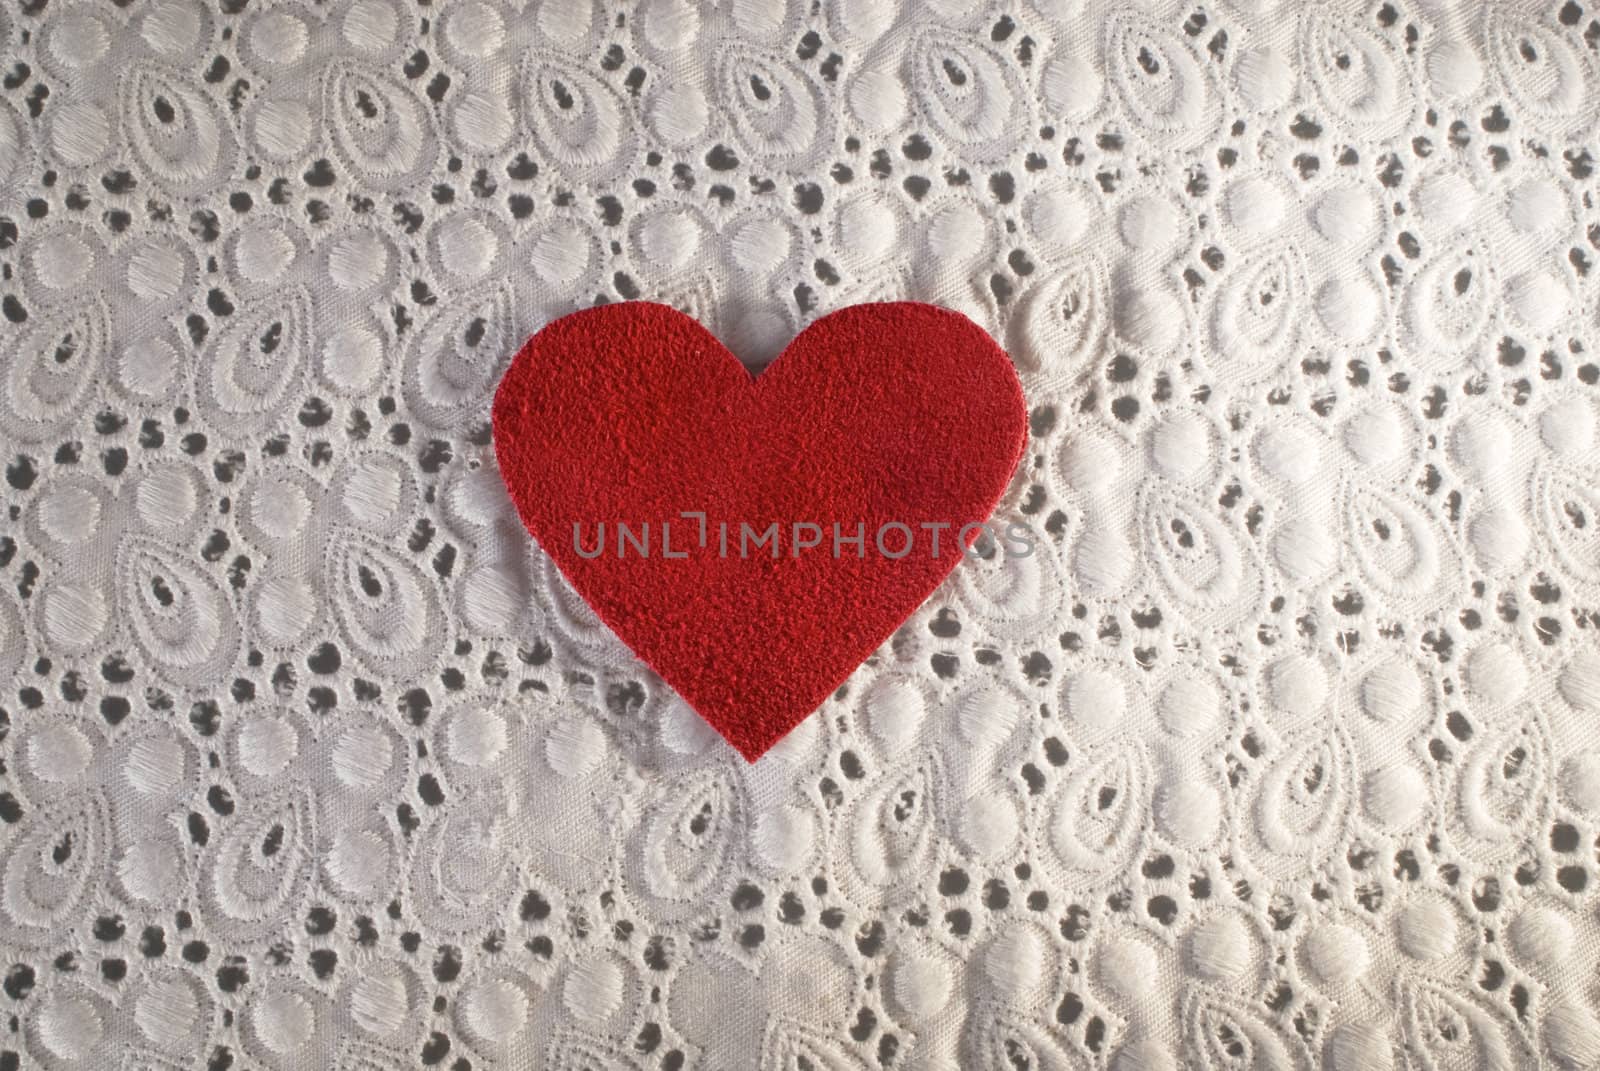 Retro Love. White fabric and red heart shape conceptual composition. Macro texture close up useful as background for design works.